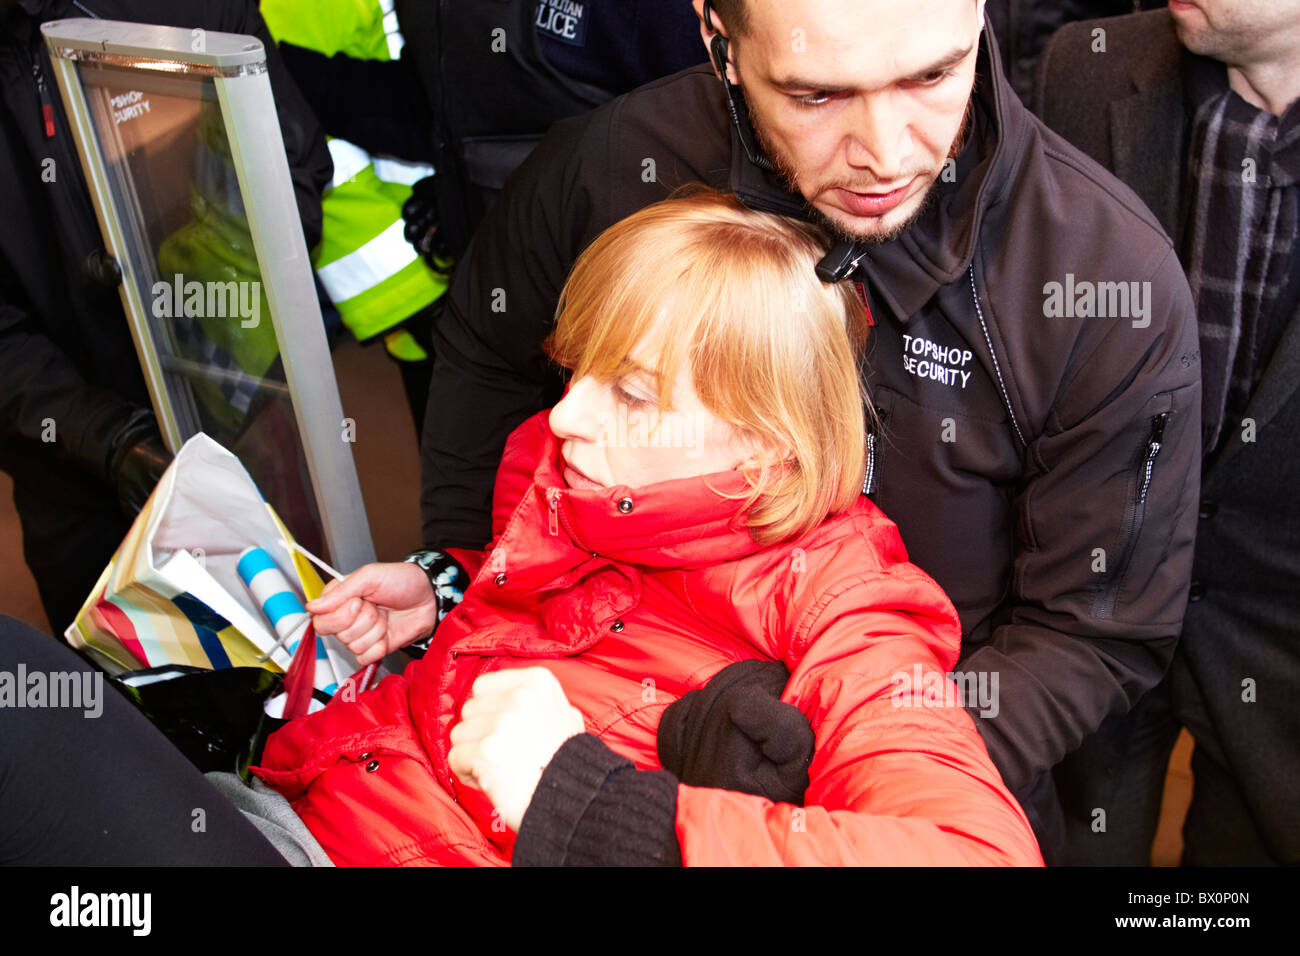 Private security guards remove a ukuncut protester from Topshop on Oxford  Street Stock Photo - Alamy